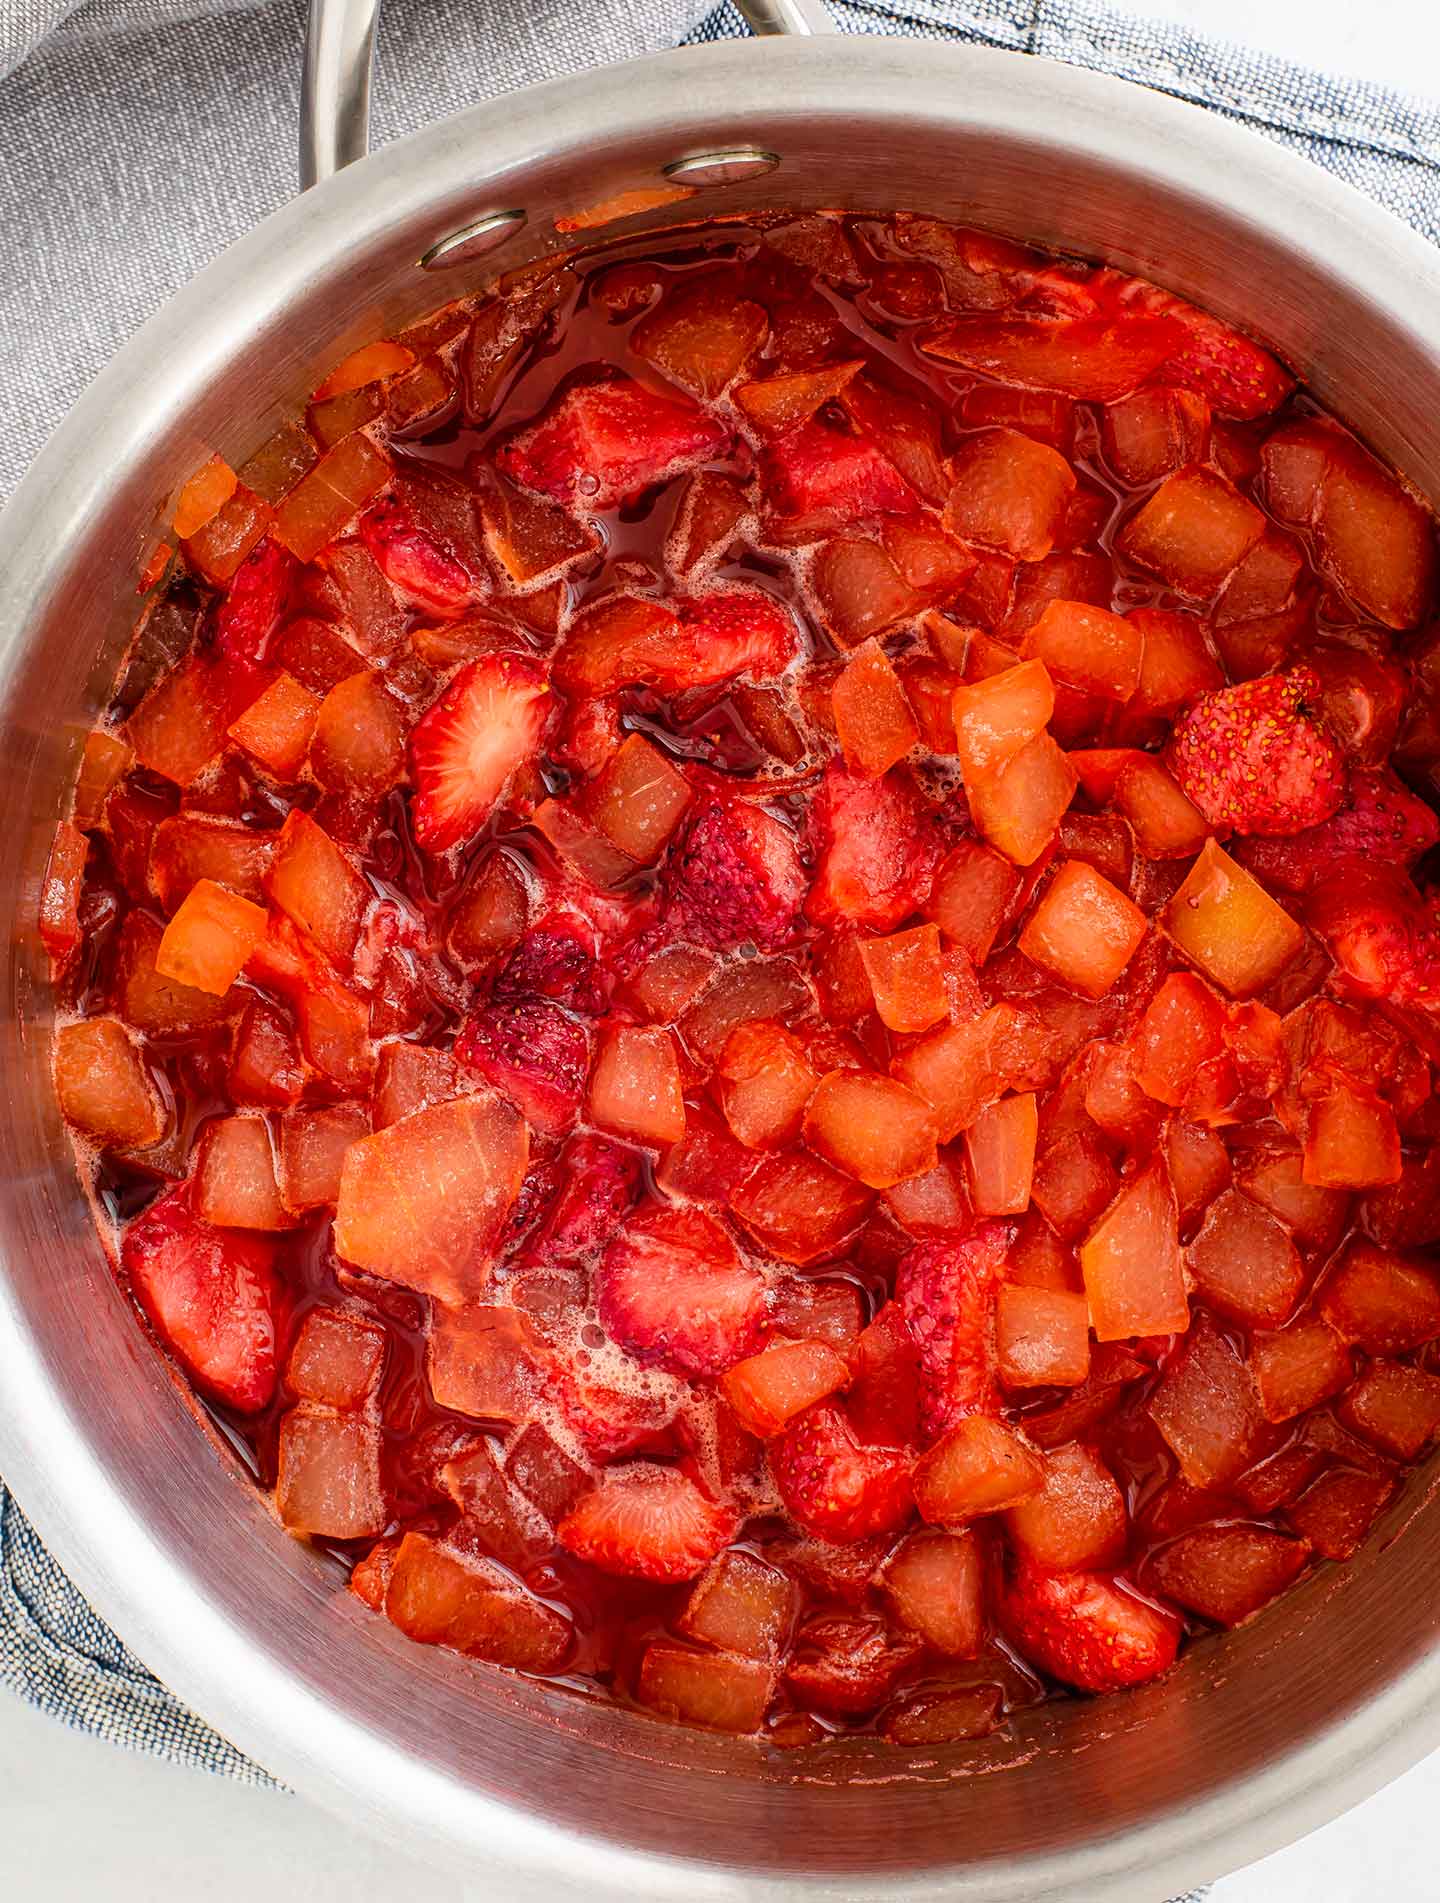 Top down view of watermelon rind and strawberries that are soft and mushy in a pot.